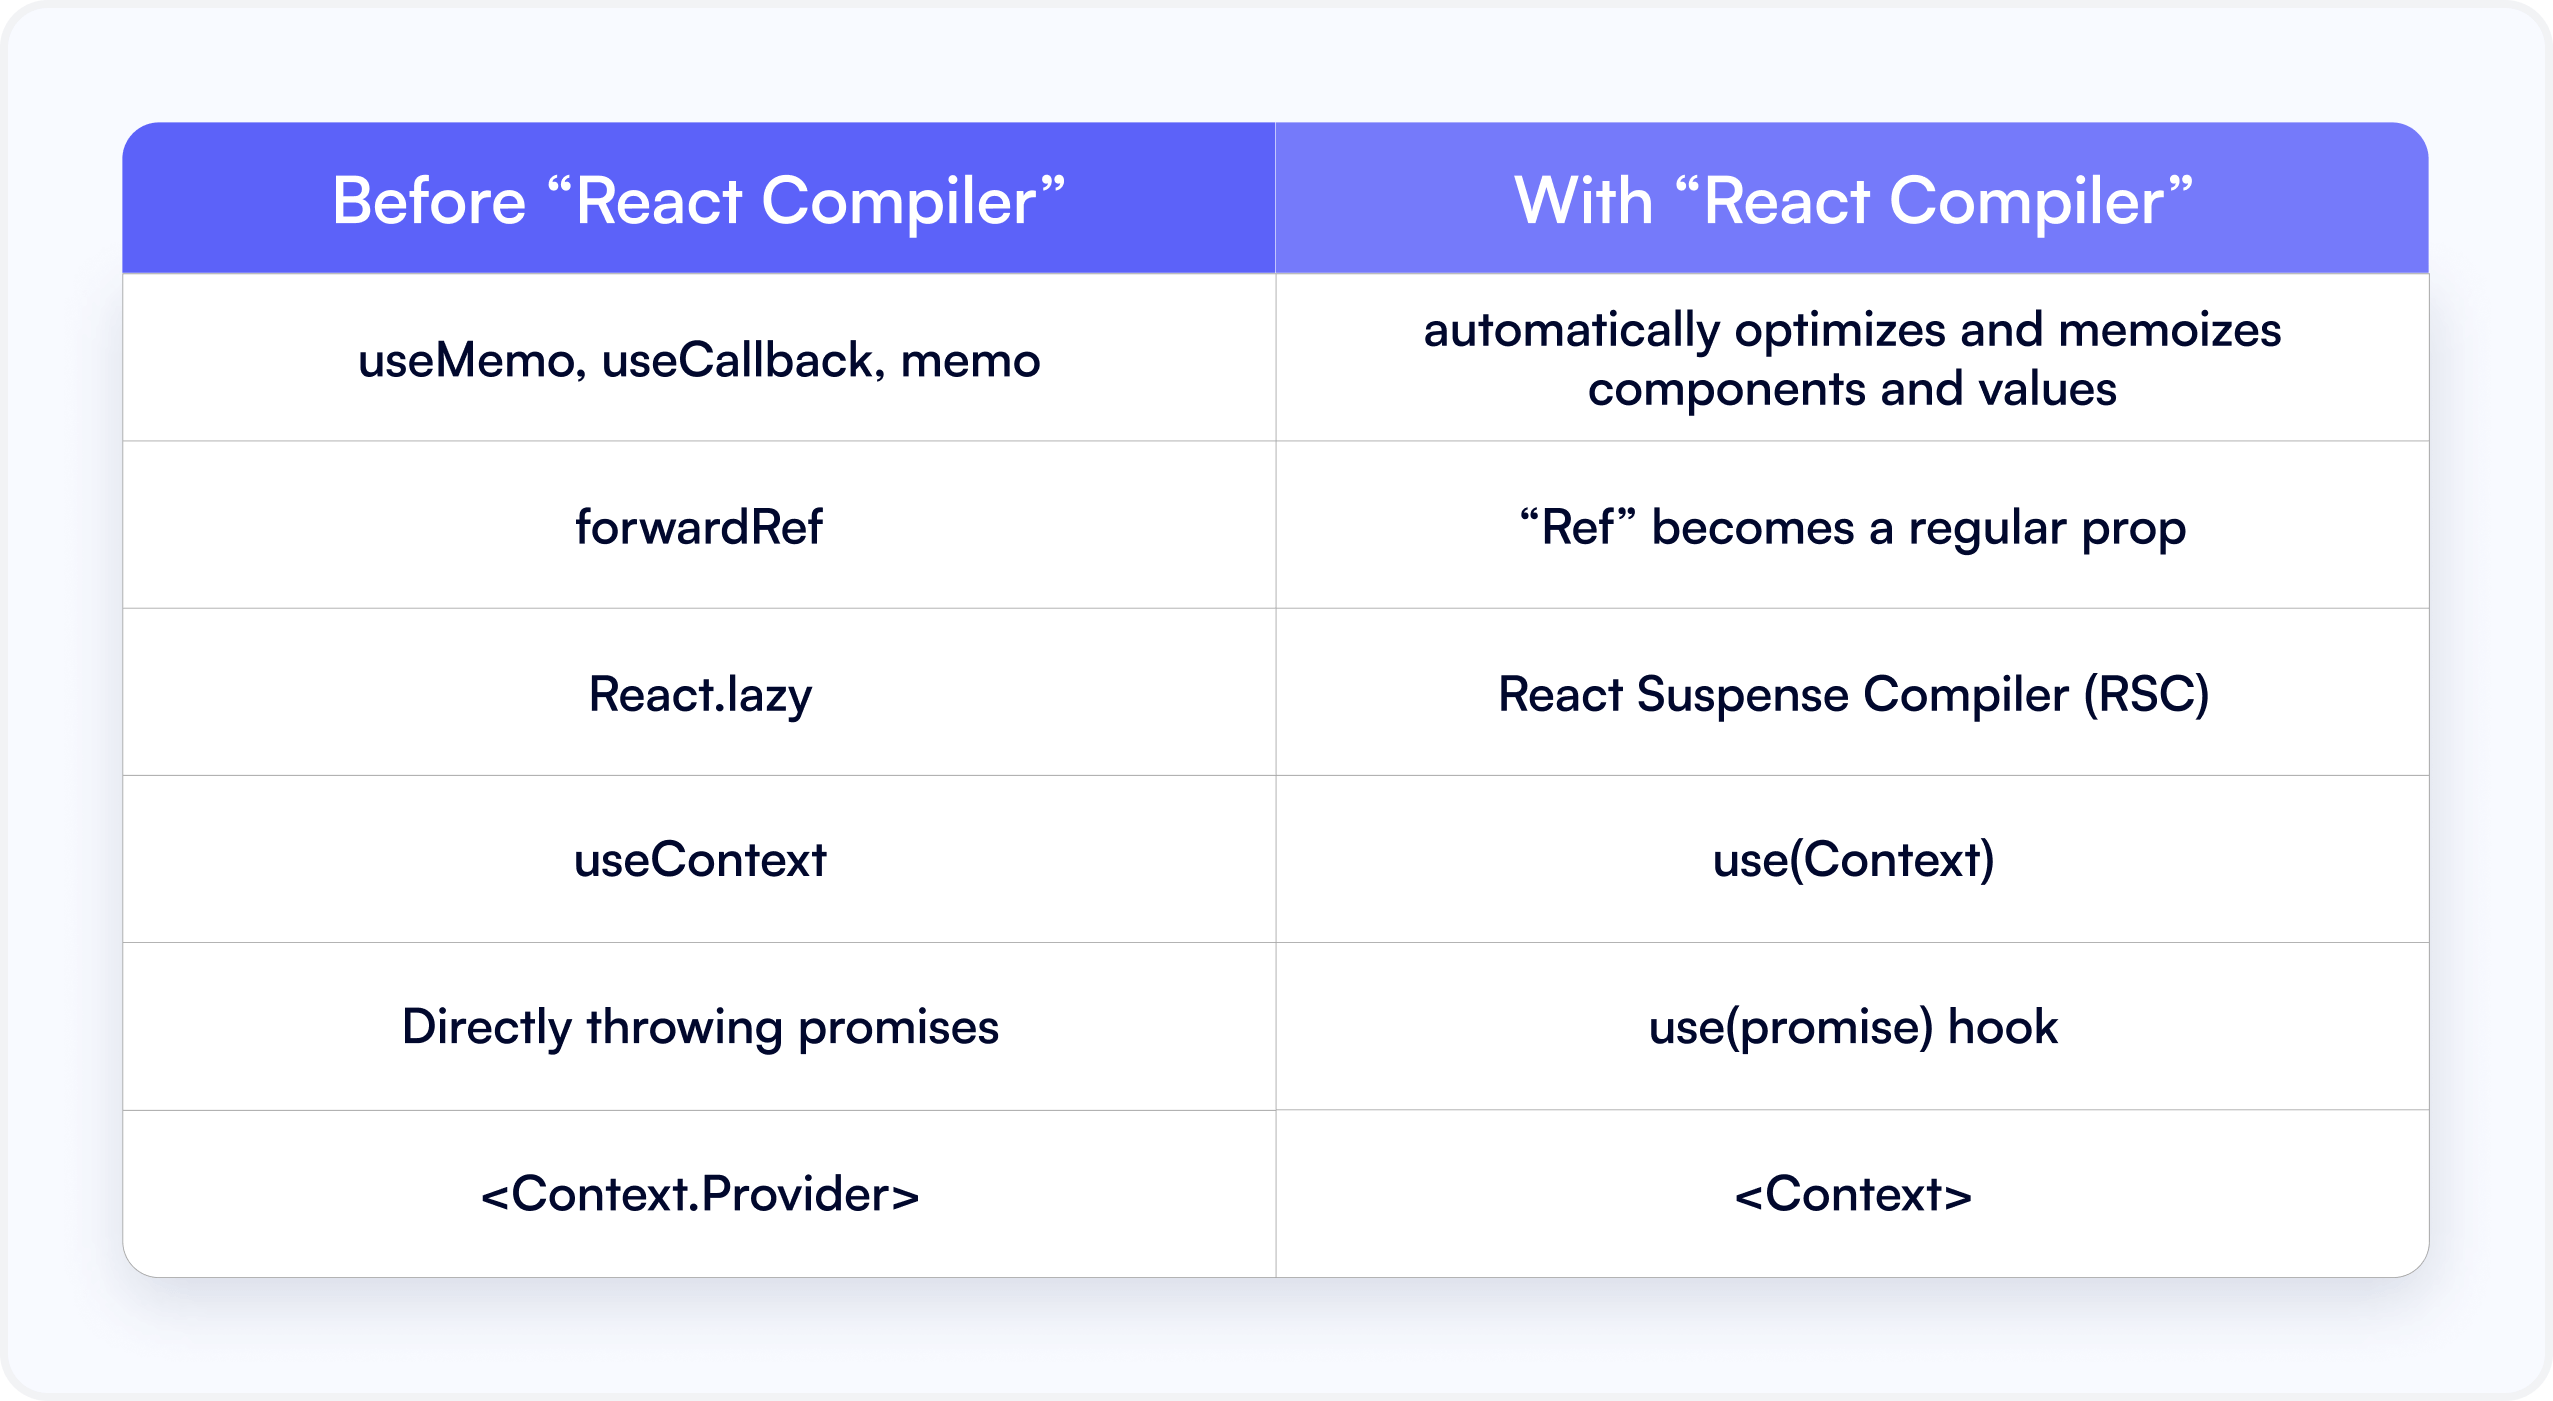 React 19 introduces new hooks including useMemo, useCallback, memo, forwardRef, React.lazy, useContext, and throw promise, optimizing component performance and simplifying management of refs, lazy loading, context values, and asynchronous operations. These changes aim to enhance the React development experience, despite requiring some adjustment for users accustomed to previous methods.